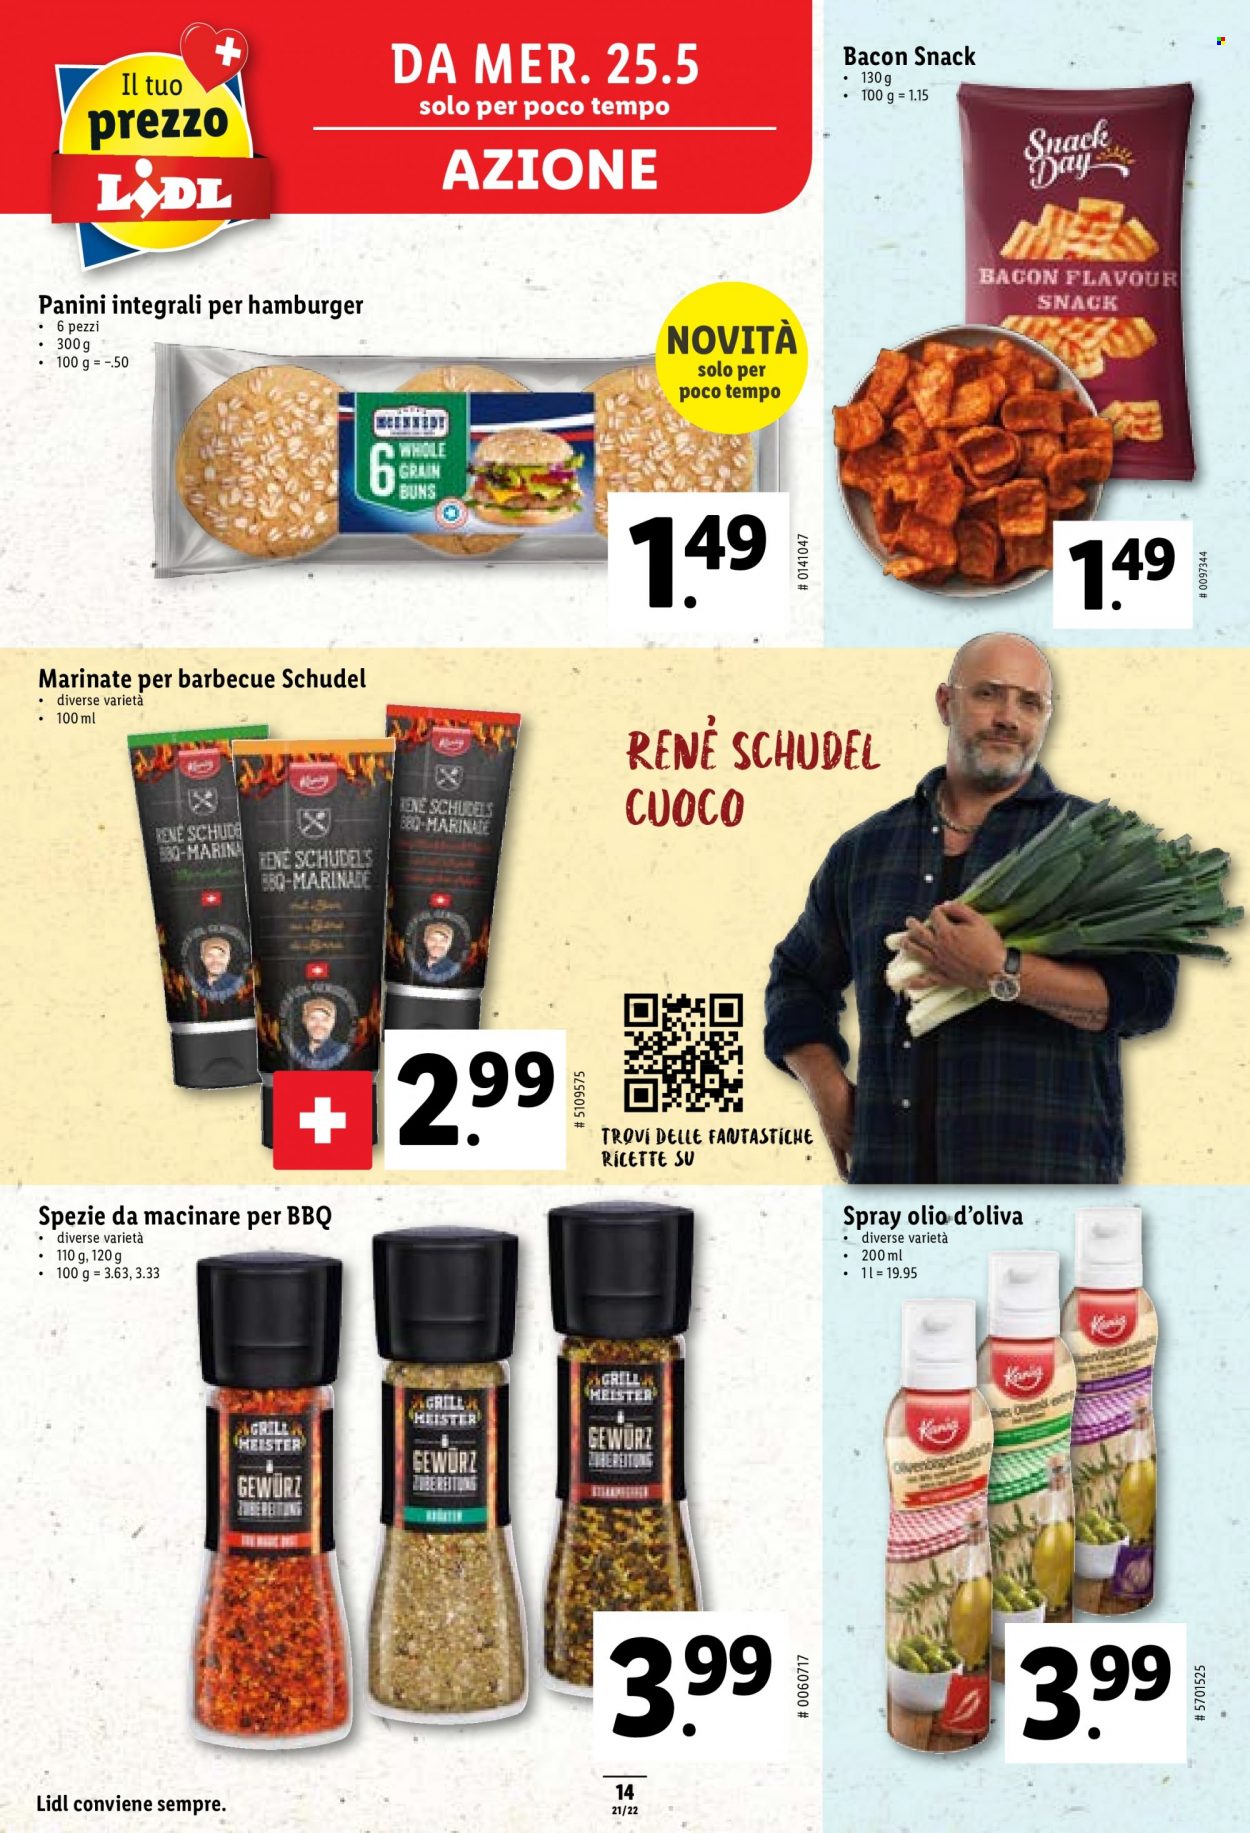 Catalogue Lidl - 25.5.2022 - 1.6.2022. Page 14.